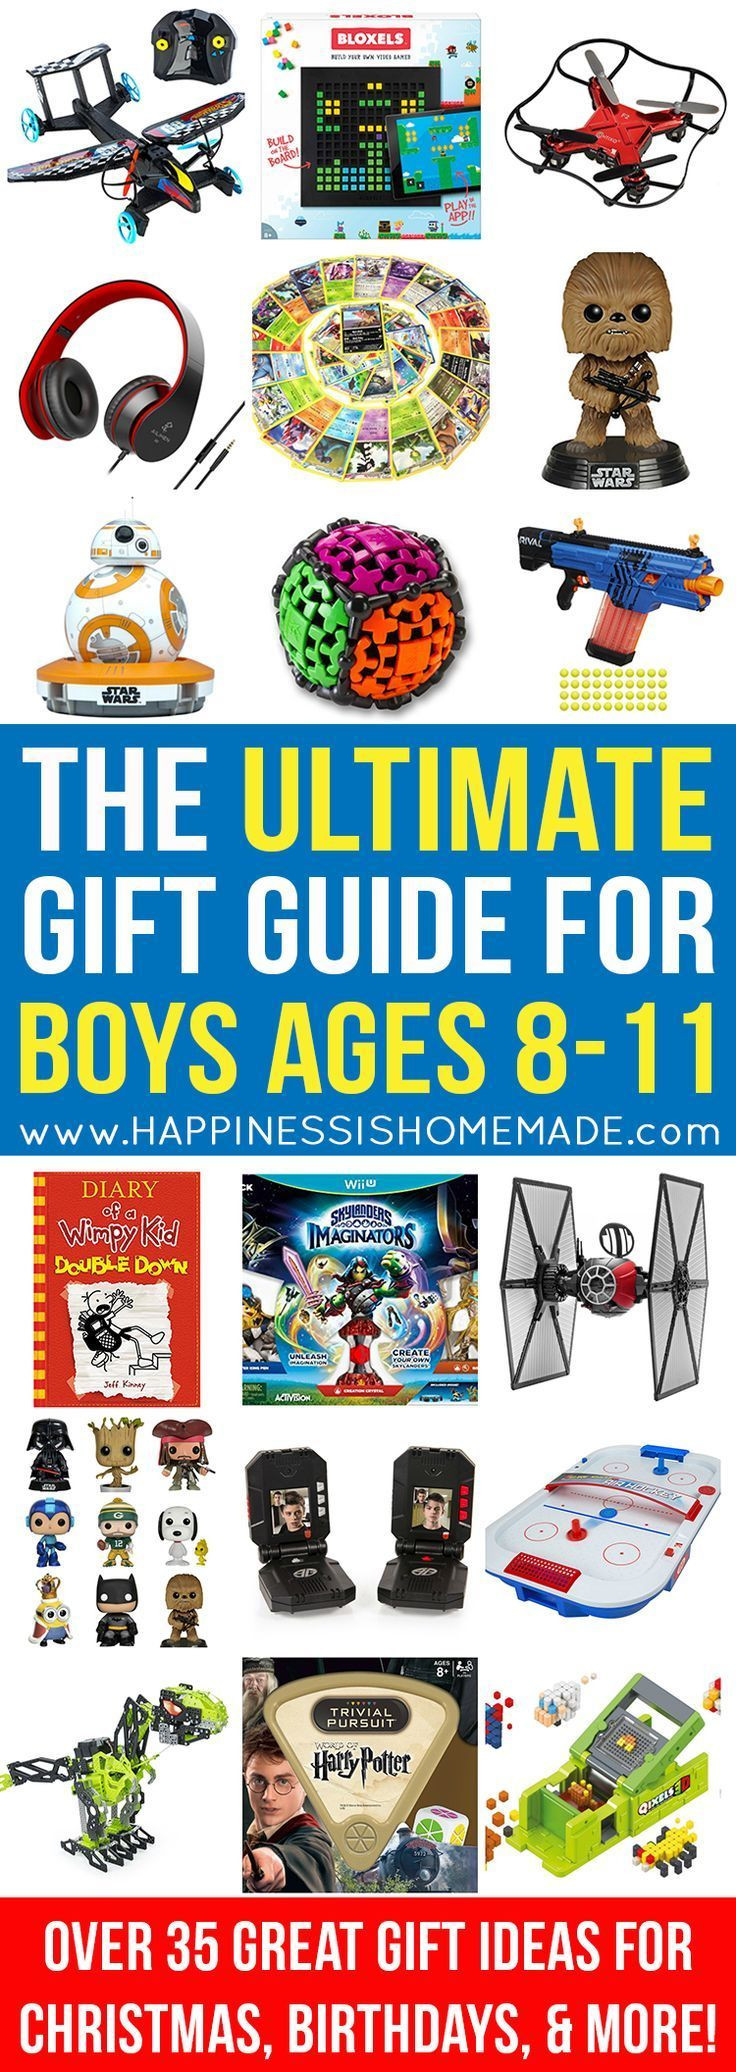 Gift Ideas For Boys Age 9
 The Best Gift Ideas for Boys Ages 8 11 Looking for t